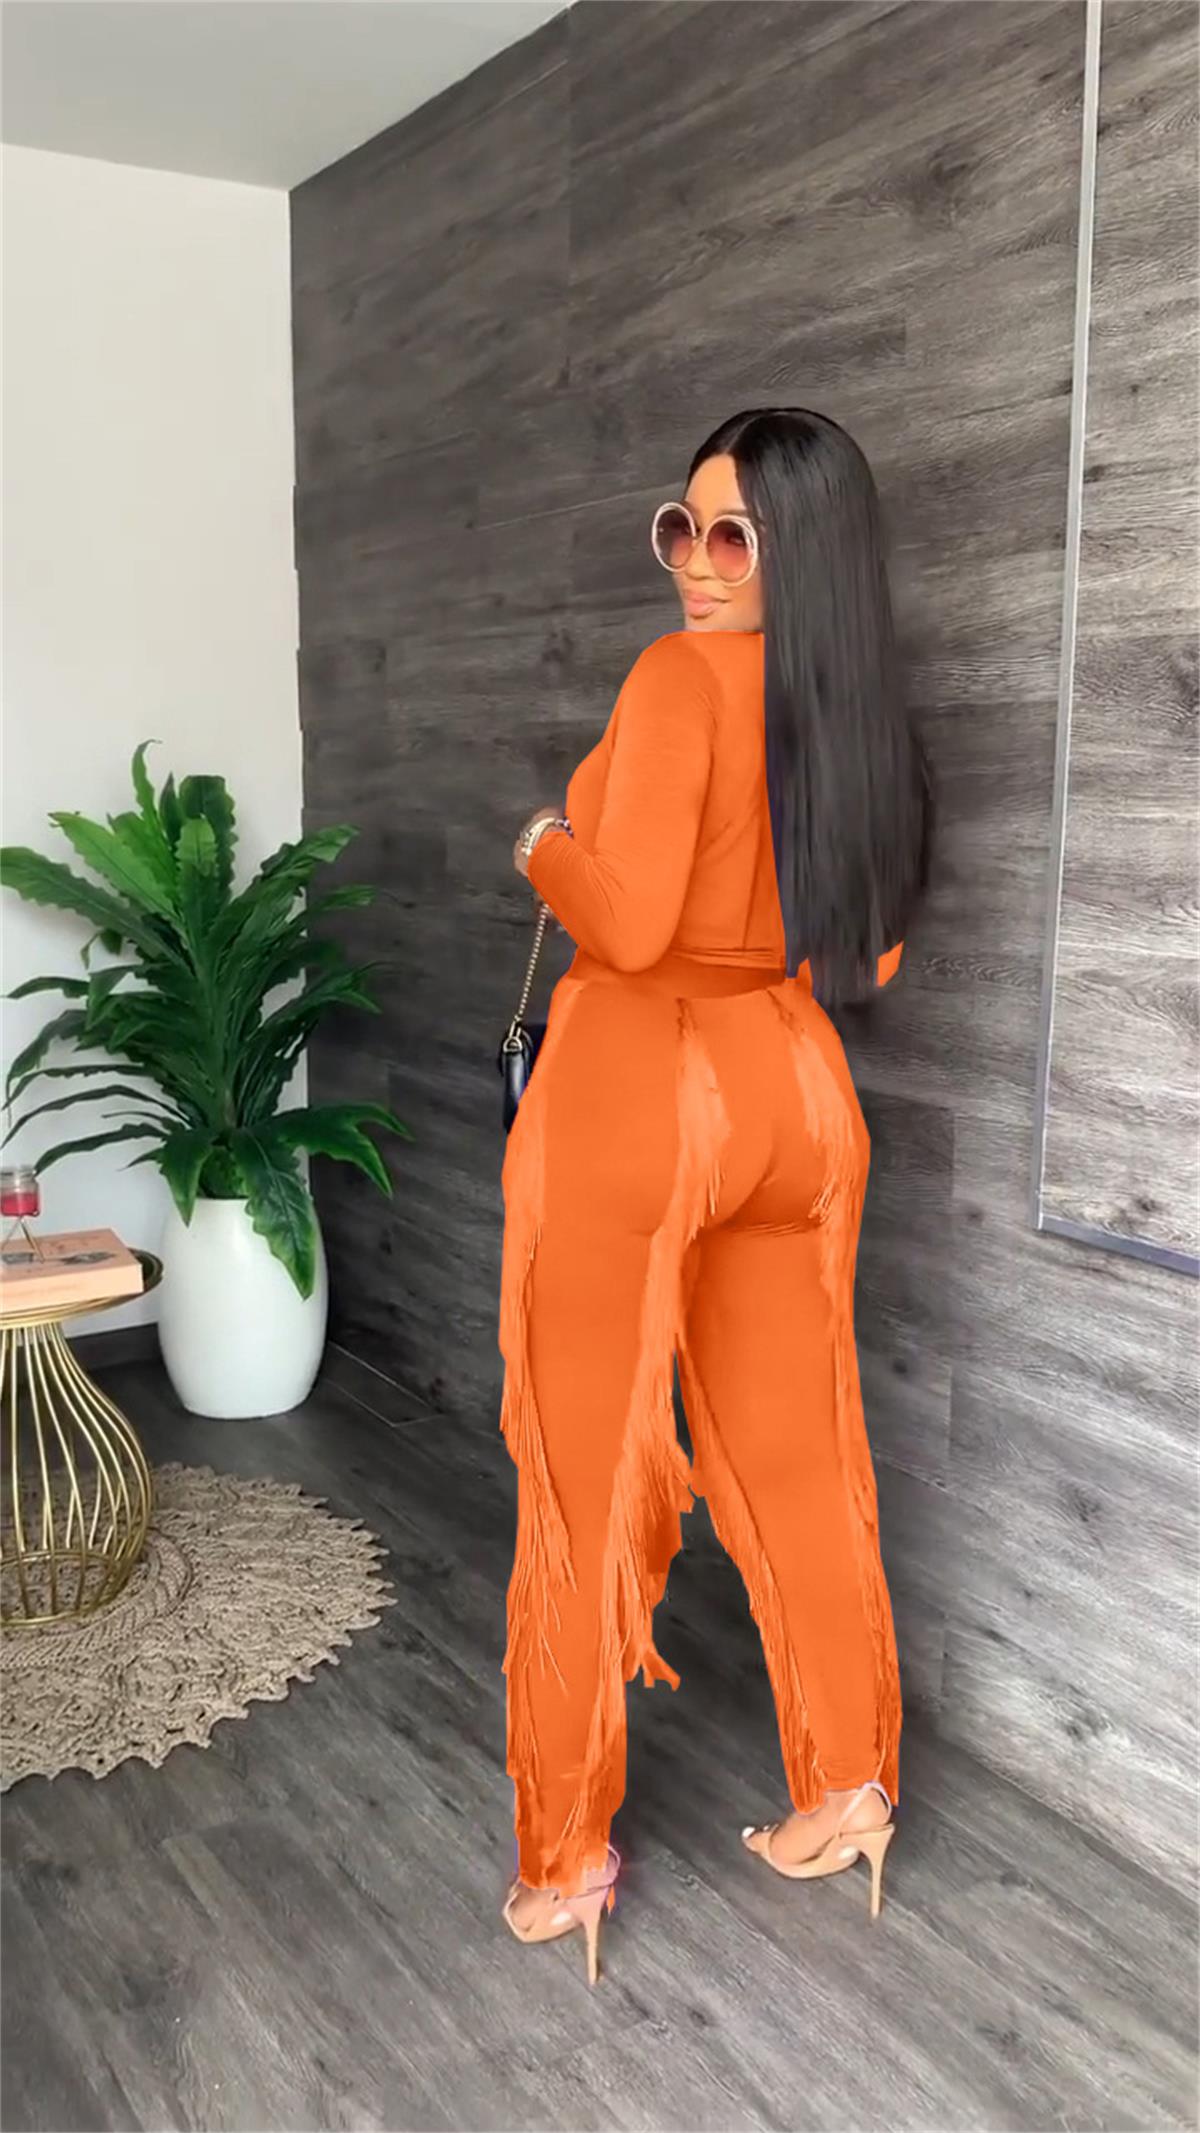 MUDAN Street Knit Ribbed Women Set Long Sleeve T-shirt and Tassel Pants Suit Elegant Tracksuit Two Piece Set Fitness Outfit